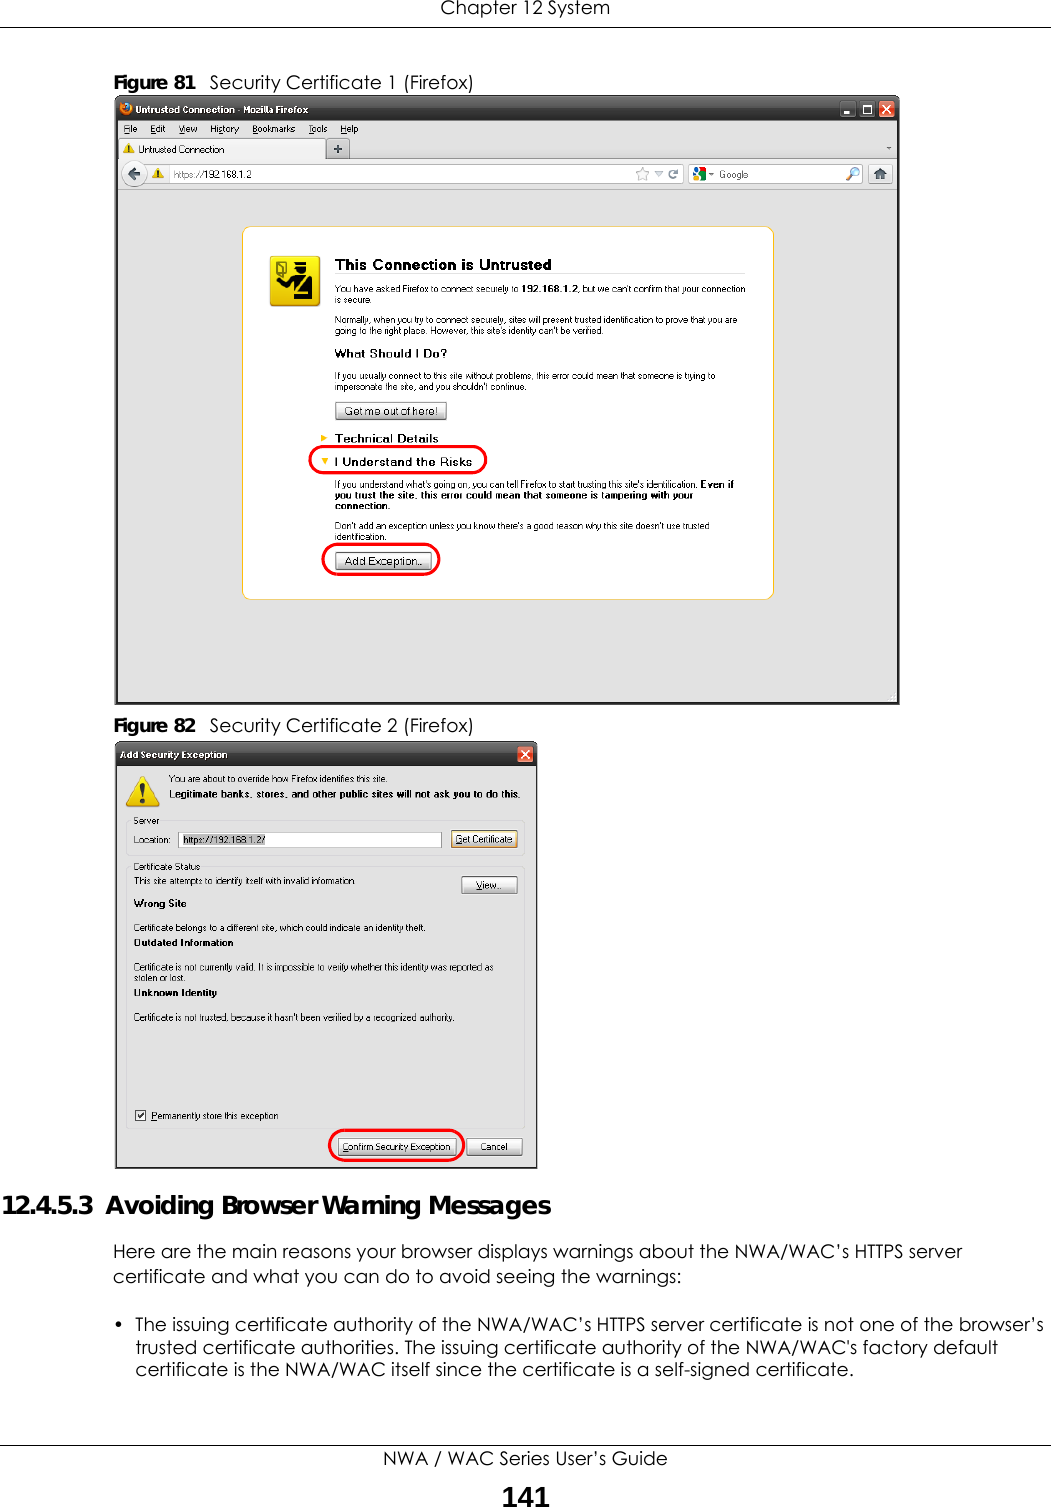 Chapter 12 SystemNWA / WAC Series User’s Guide141Figure 81   Security Certificate 1 (Firefox)Figure 82   Security Certificate 2 (Firefox)12.4.5.3  Avoiding Browser Warning MessagesHere are the main reasons your browser displays warnings about the NWA/WAC’s HTTPS server certificate and what you can do to avoid seeing the warnings:• The issuing certificate authority of the NWA/WAC’s HTTPS server certificate is not one of the browser’s trusted certificate authorities. The issuing certificate authority of the NWA/WAC&apos;s factory default certificate is the NWA/WAC itself since the certificate is a self-signed certificate. 